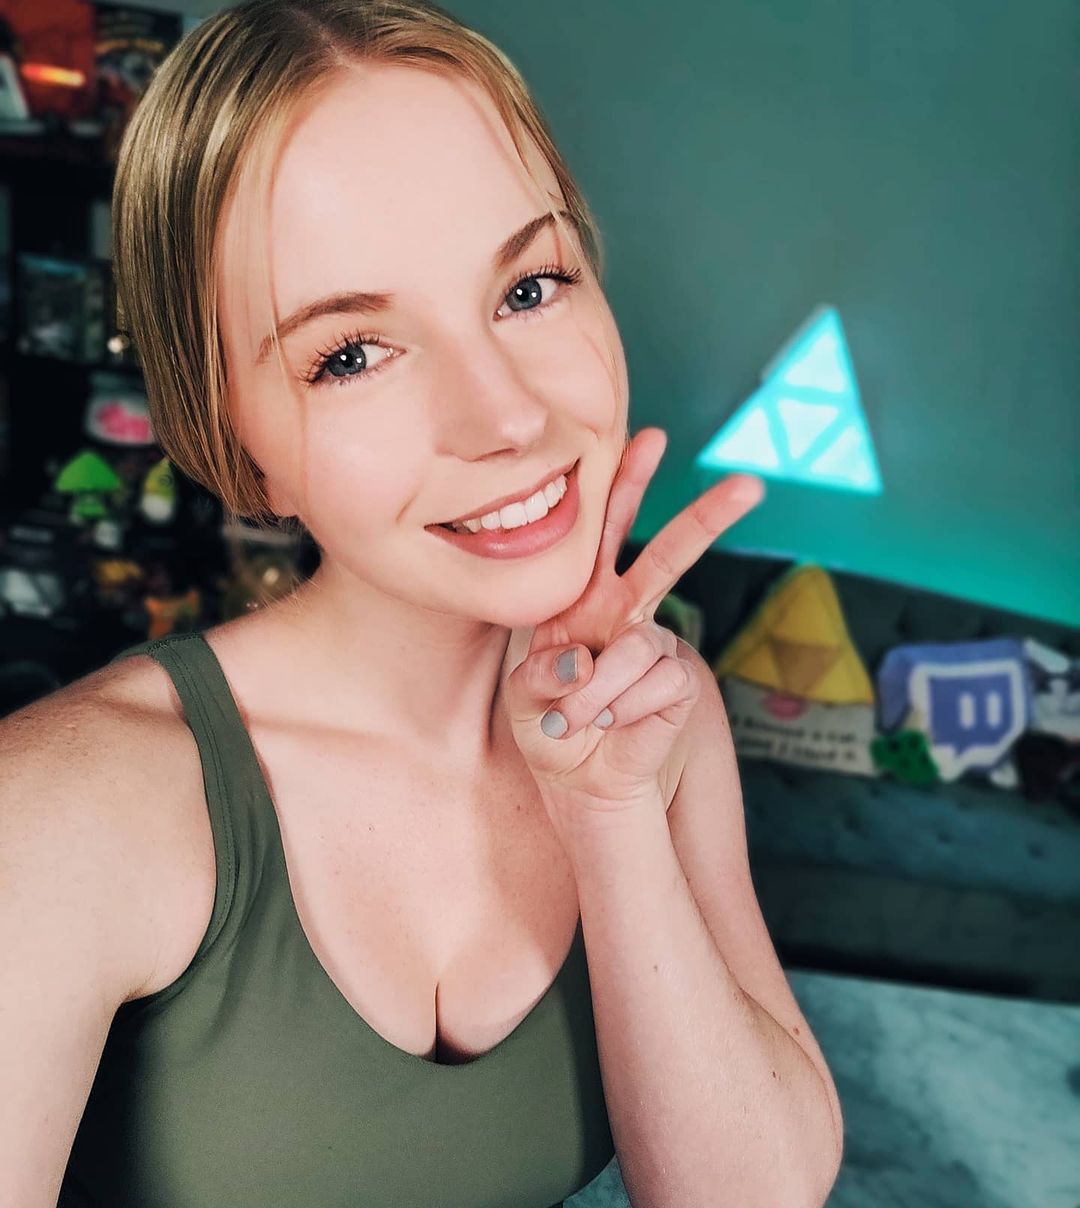 Happy Monday! How was your weekend?! I'm live on Twitch! I wanna chat with y'al 1